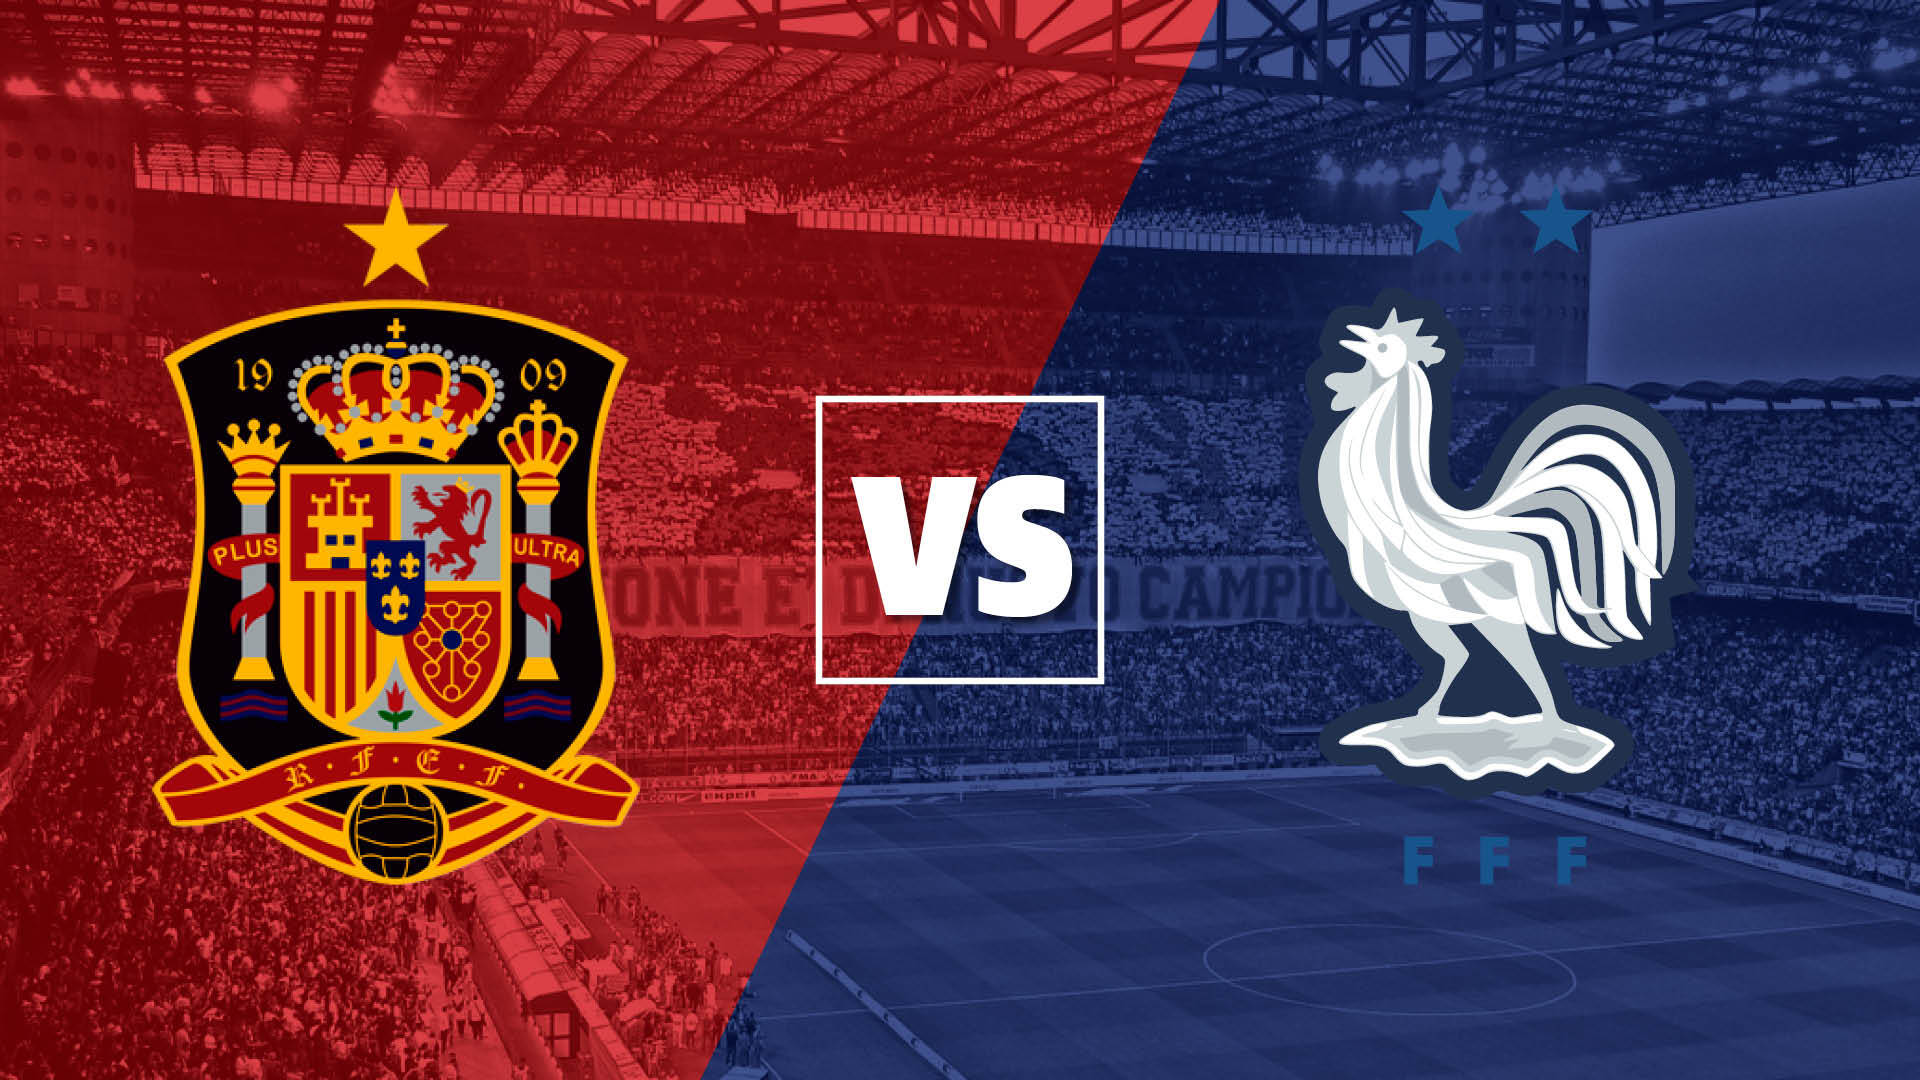 Spain Vs France Live Stream And How To Watch The UEFA Nations League Final Online And On TV, Team News. What Hi Fi?